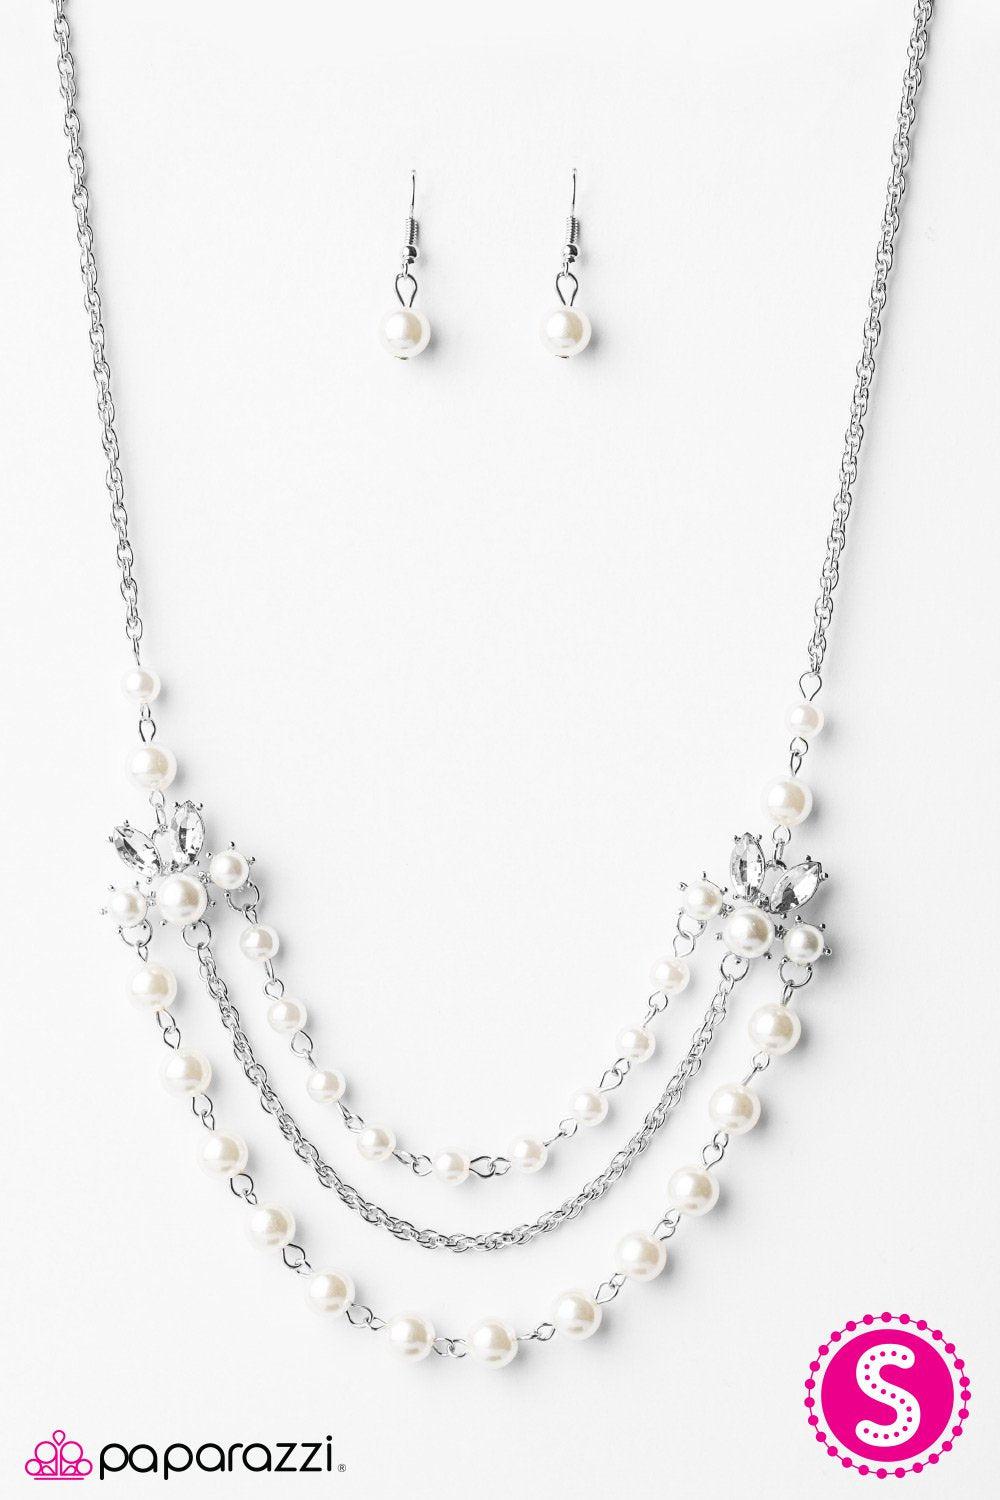 Miss Magnificent White Pearl Necklace and matching Earrings - Paparazzi Accessories-CarasShop.com - $5 Jewelry by Cara Jewels